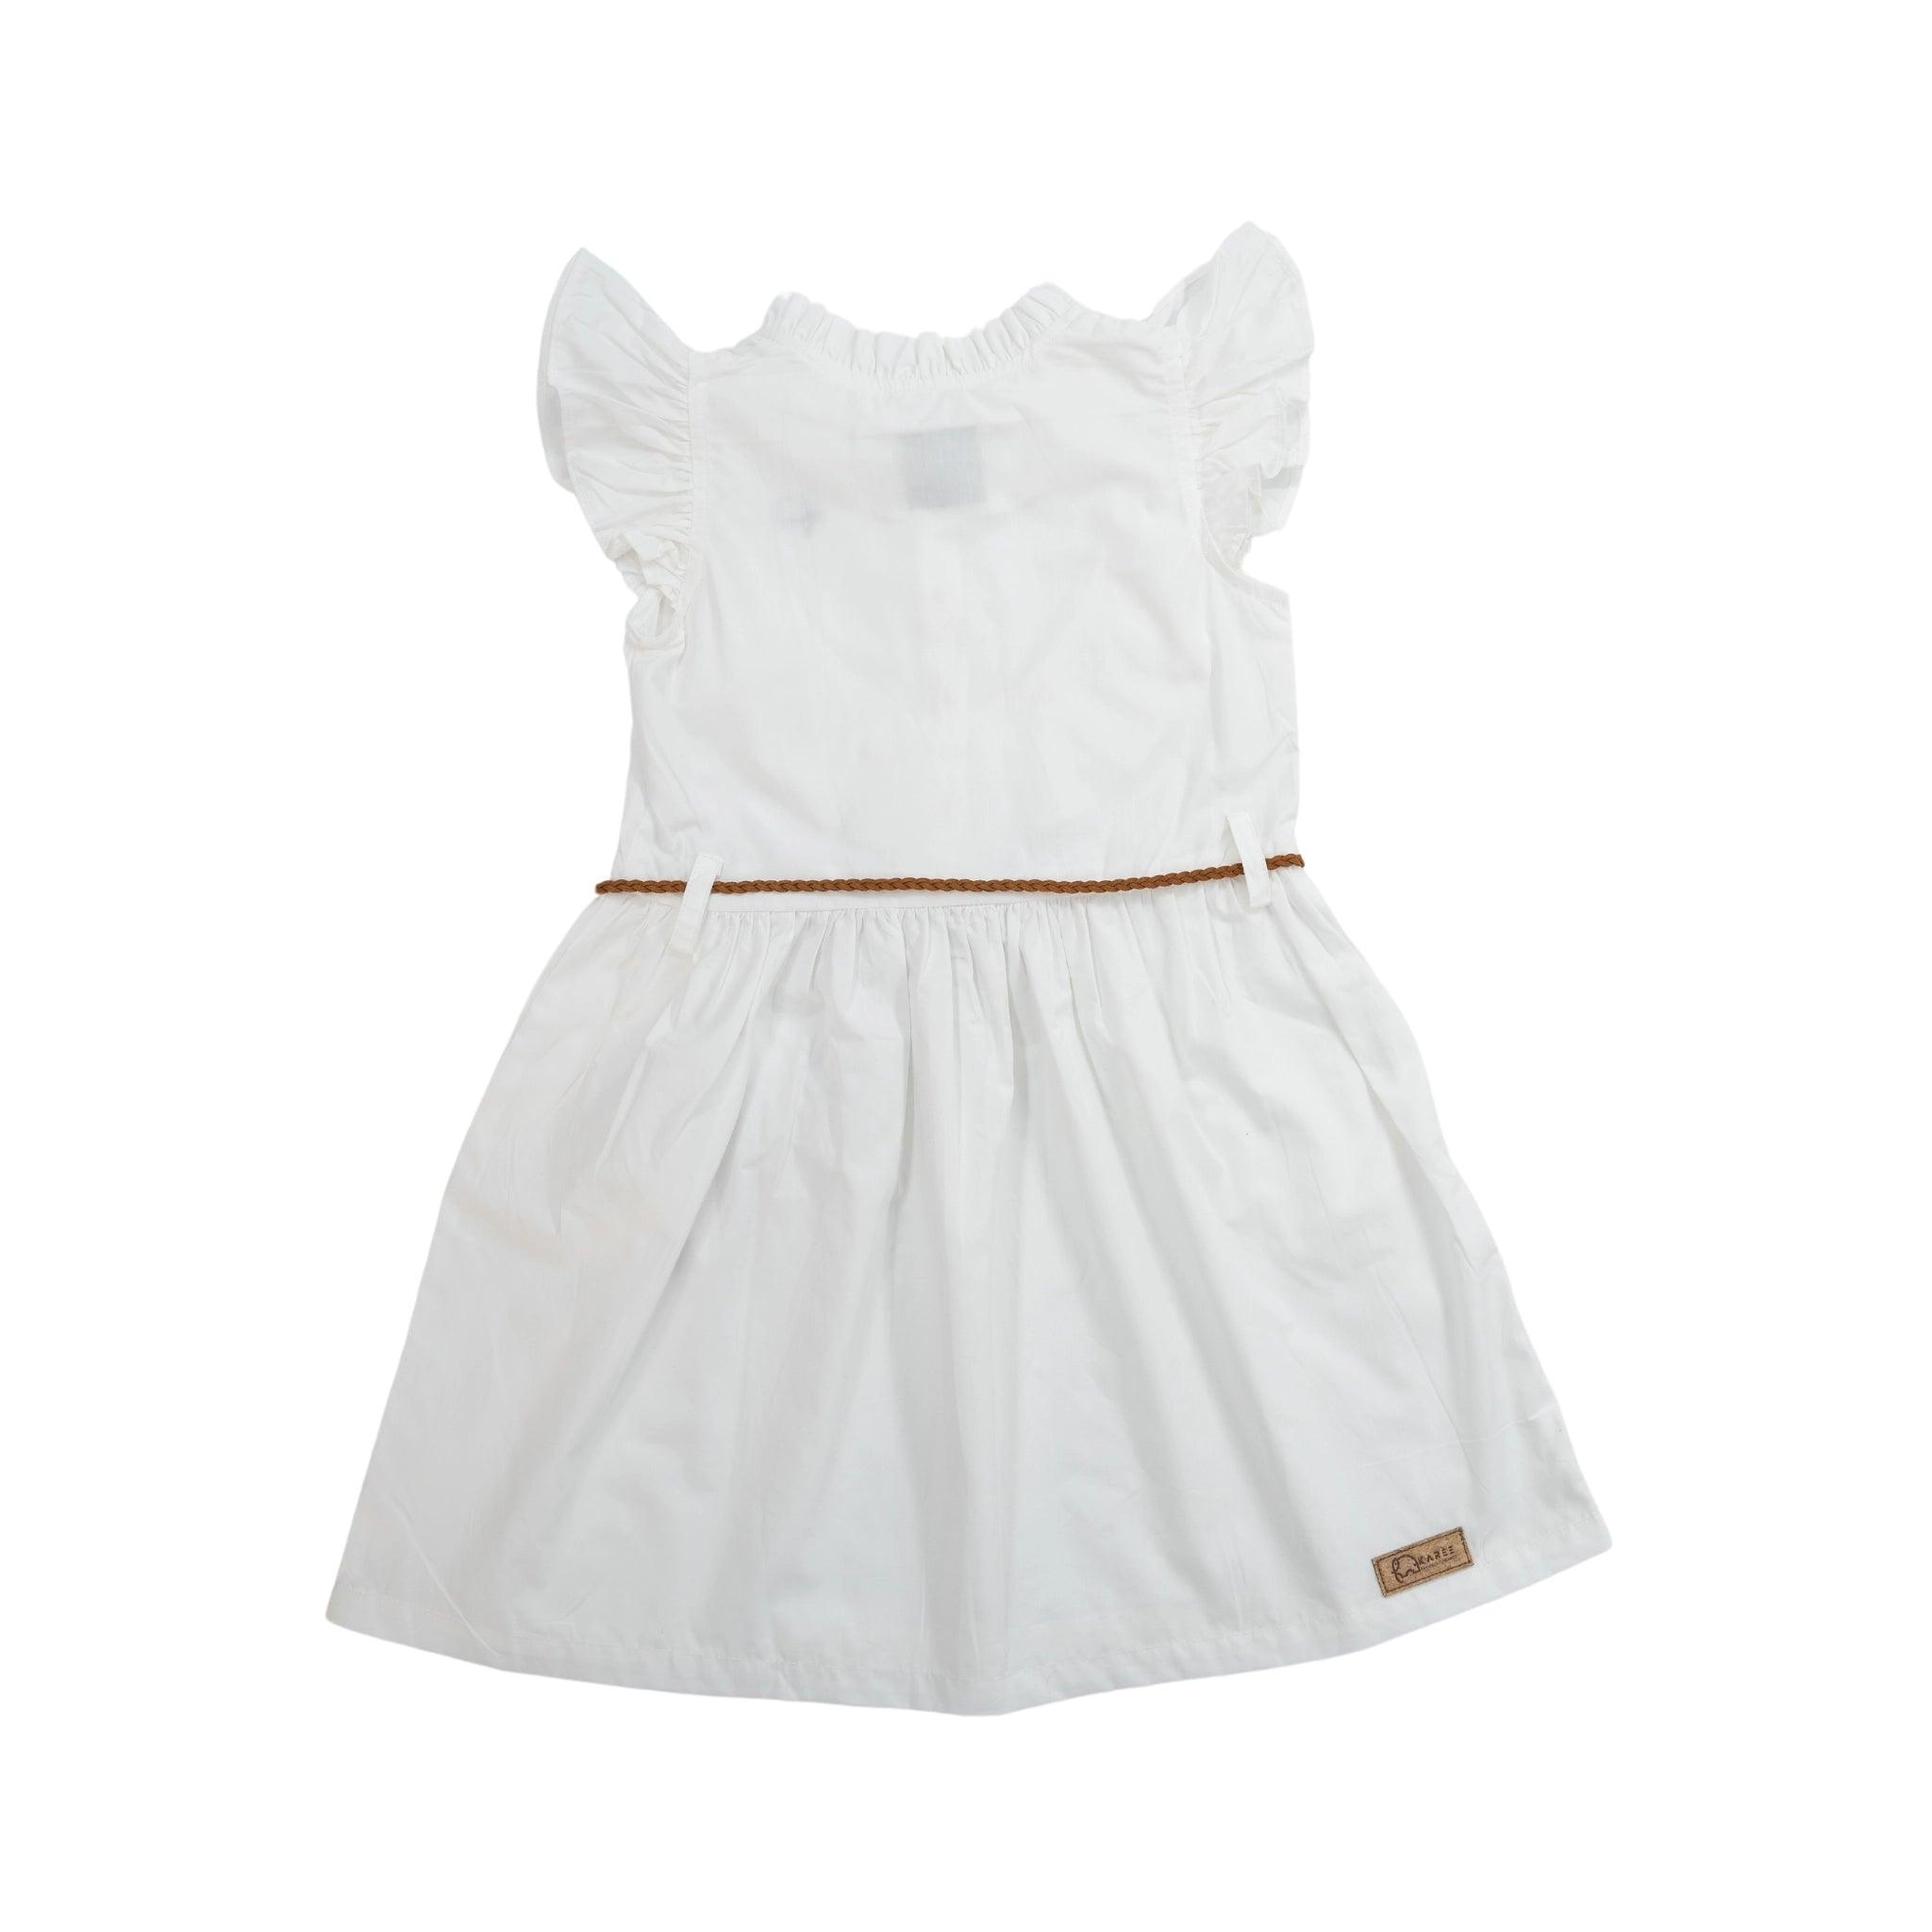 A white toddler's Butterfly Sleeve Cotton Dress in White with butterfly sleeves and a thin brown belt, displayed against a plain white background by Karee.